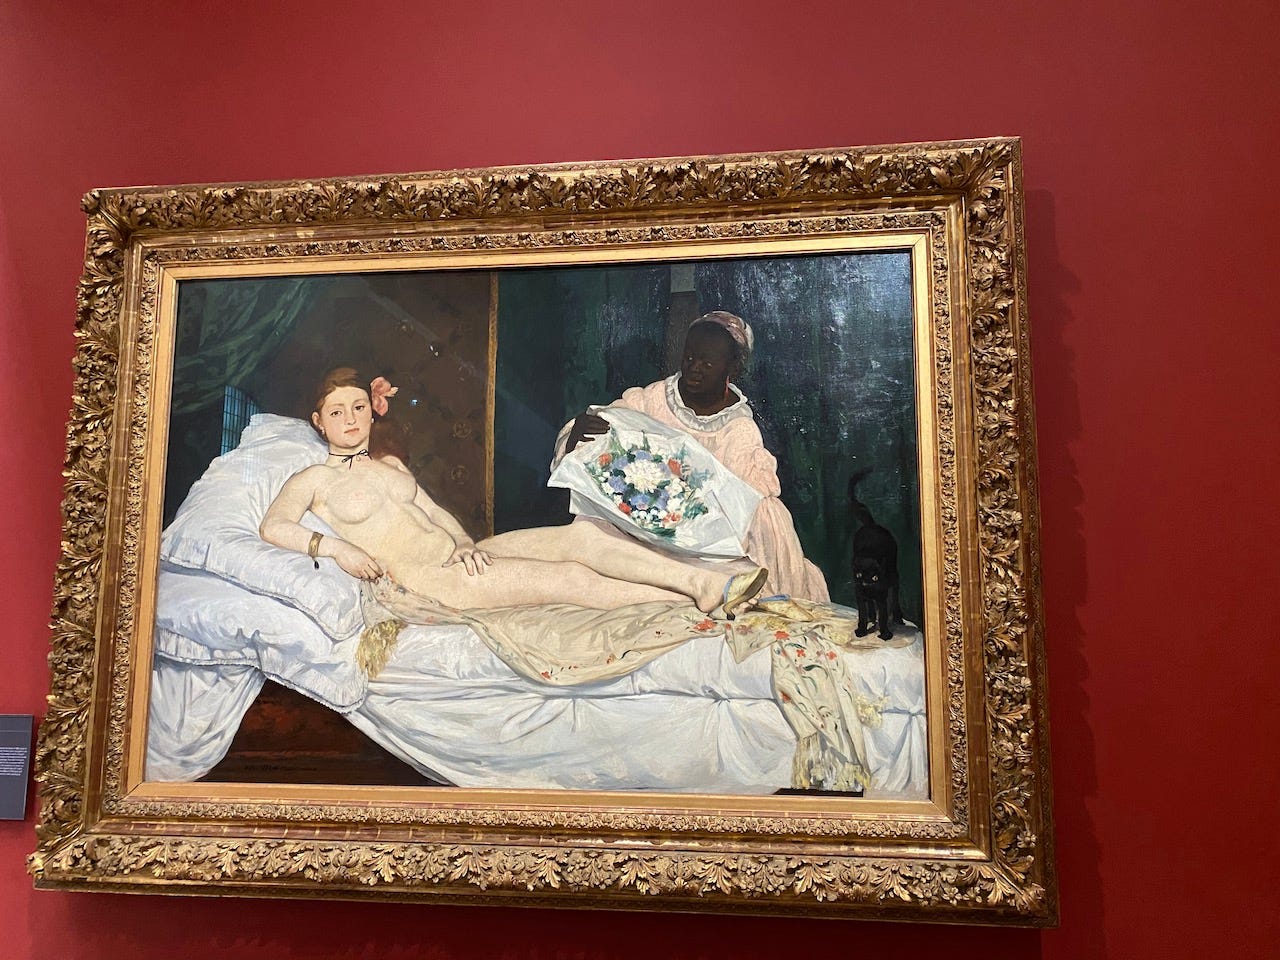 [Olympia](https://youtu.be/bihBbqzL96Y) / Manet, he was also a part of the Realism art movement. This has traces from both movement.